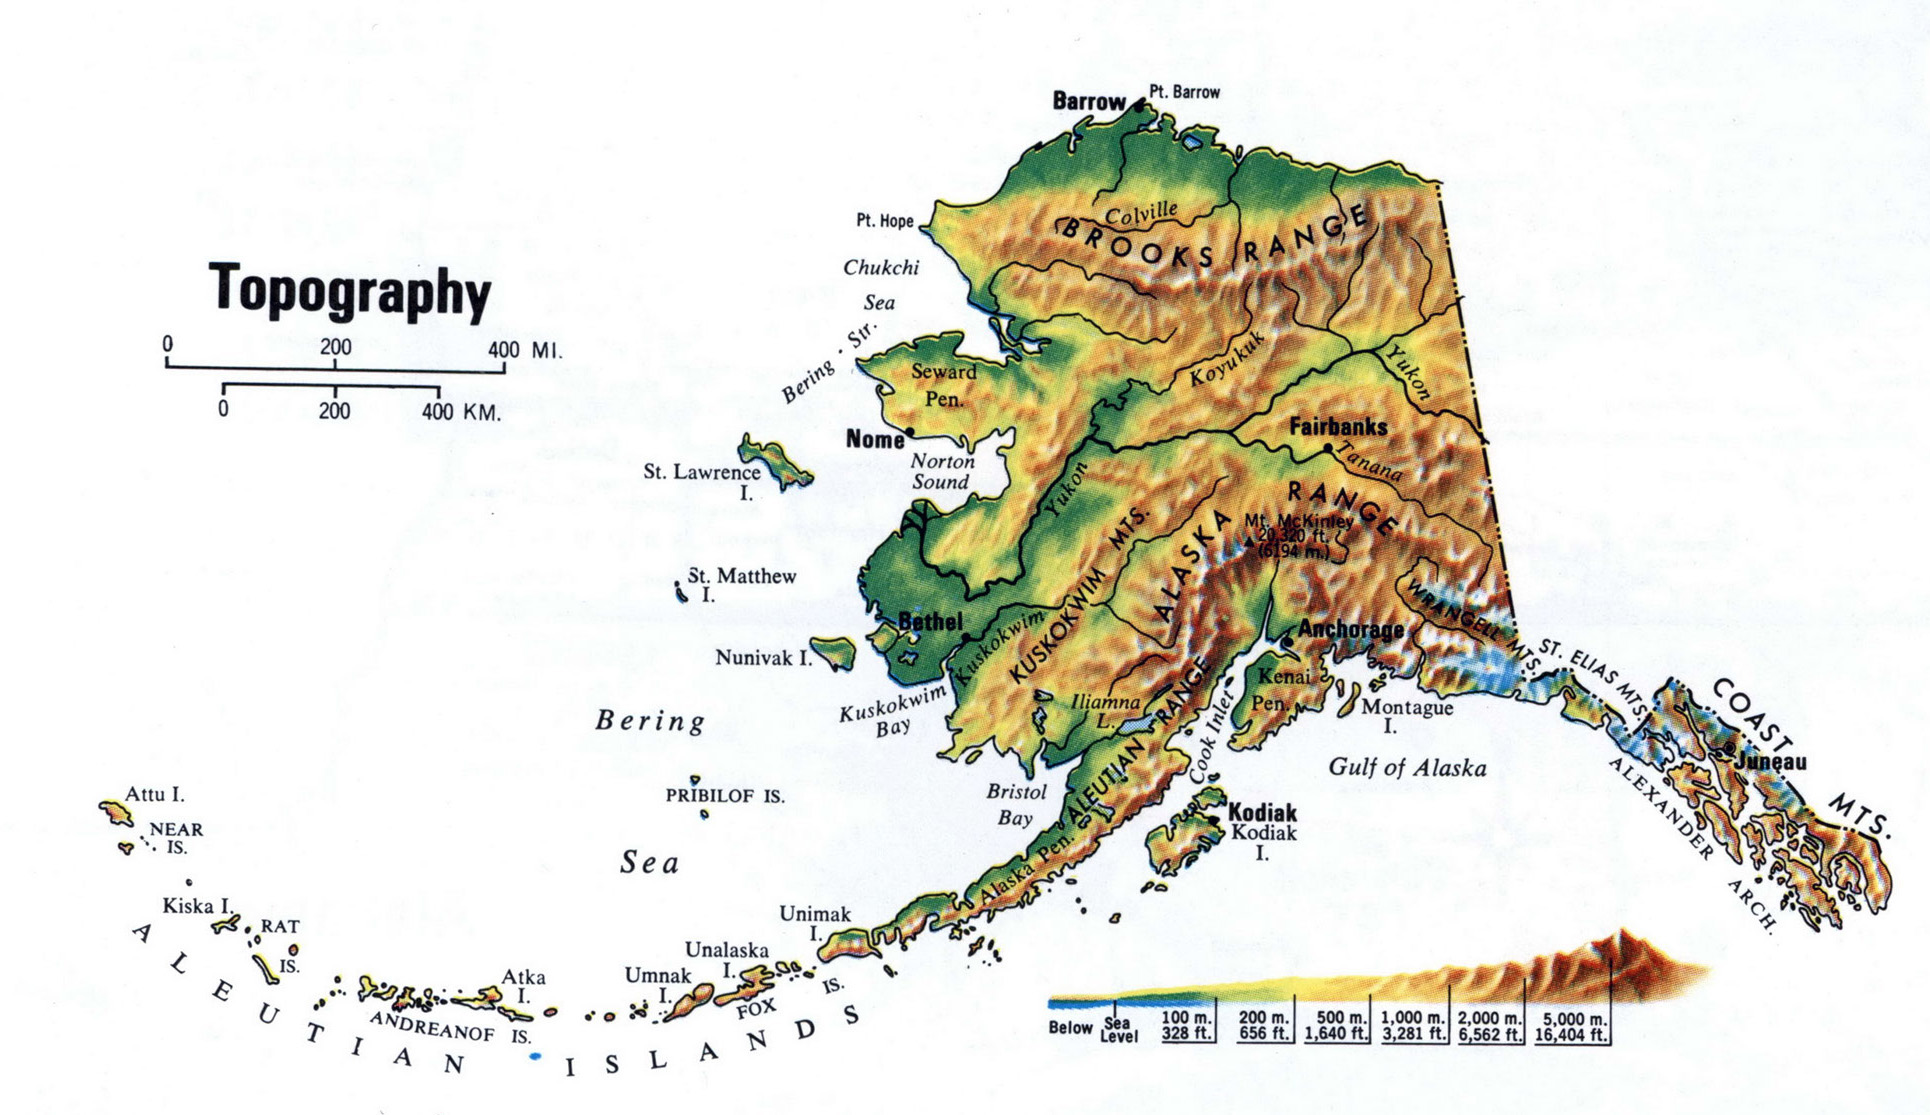 Elevation Map Of Alaska Large topography map of Alaska state | Alaska state | USA | Maps 